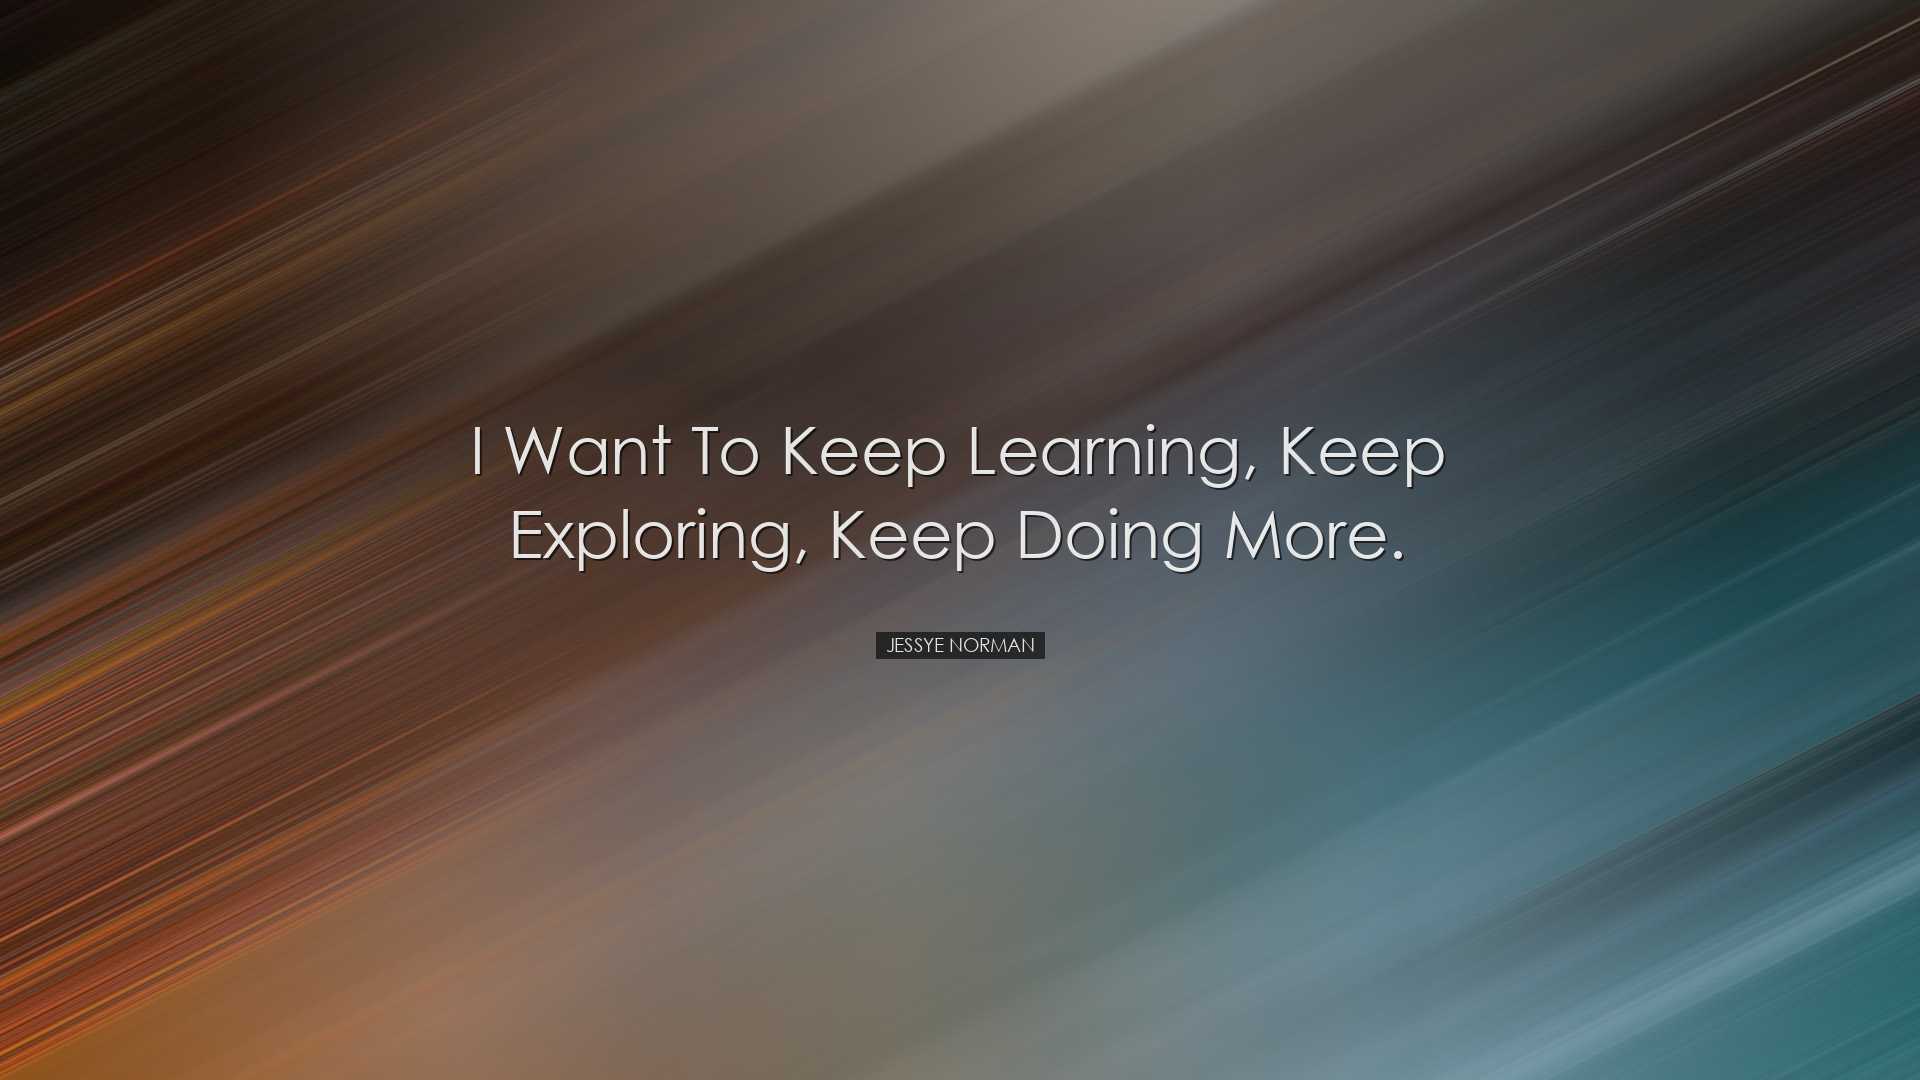 I want to keep learning, keep exploring, keep doing more. - Jessye